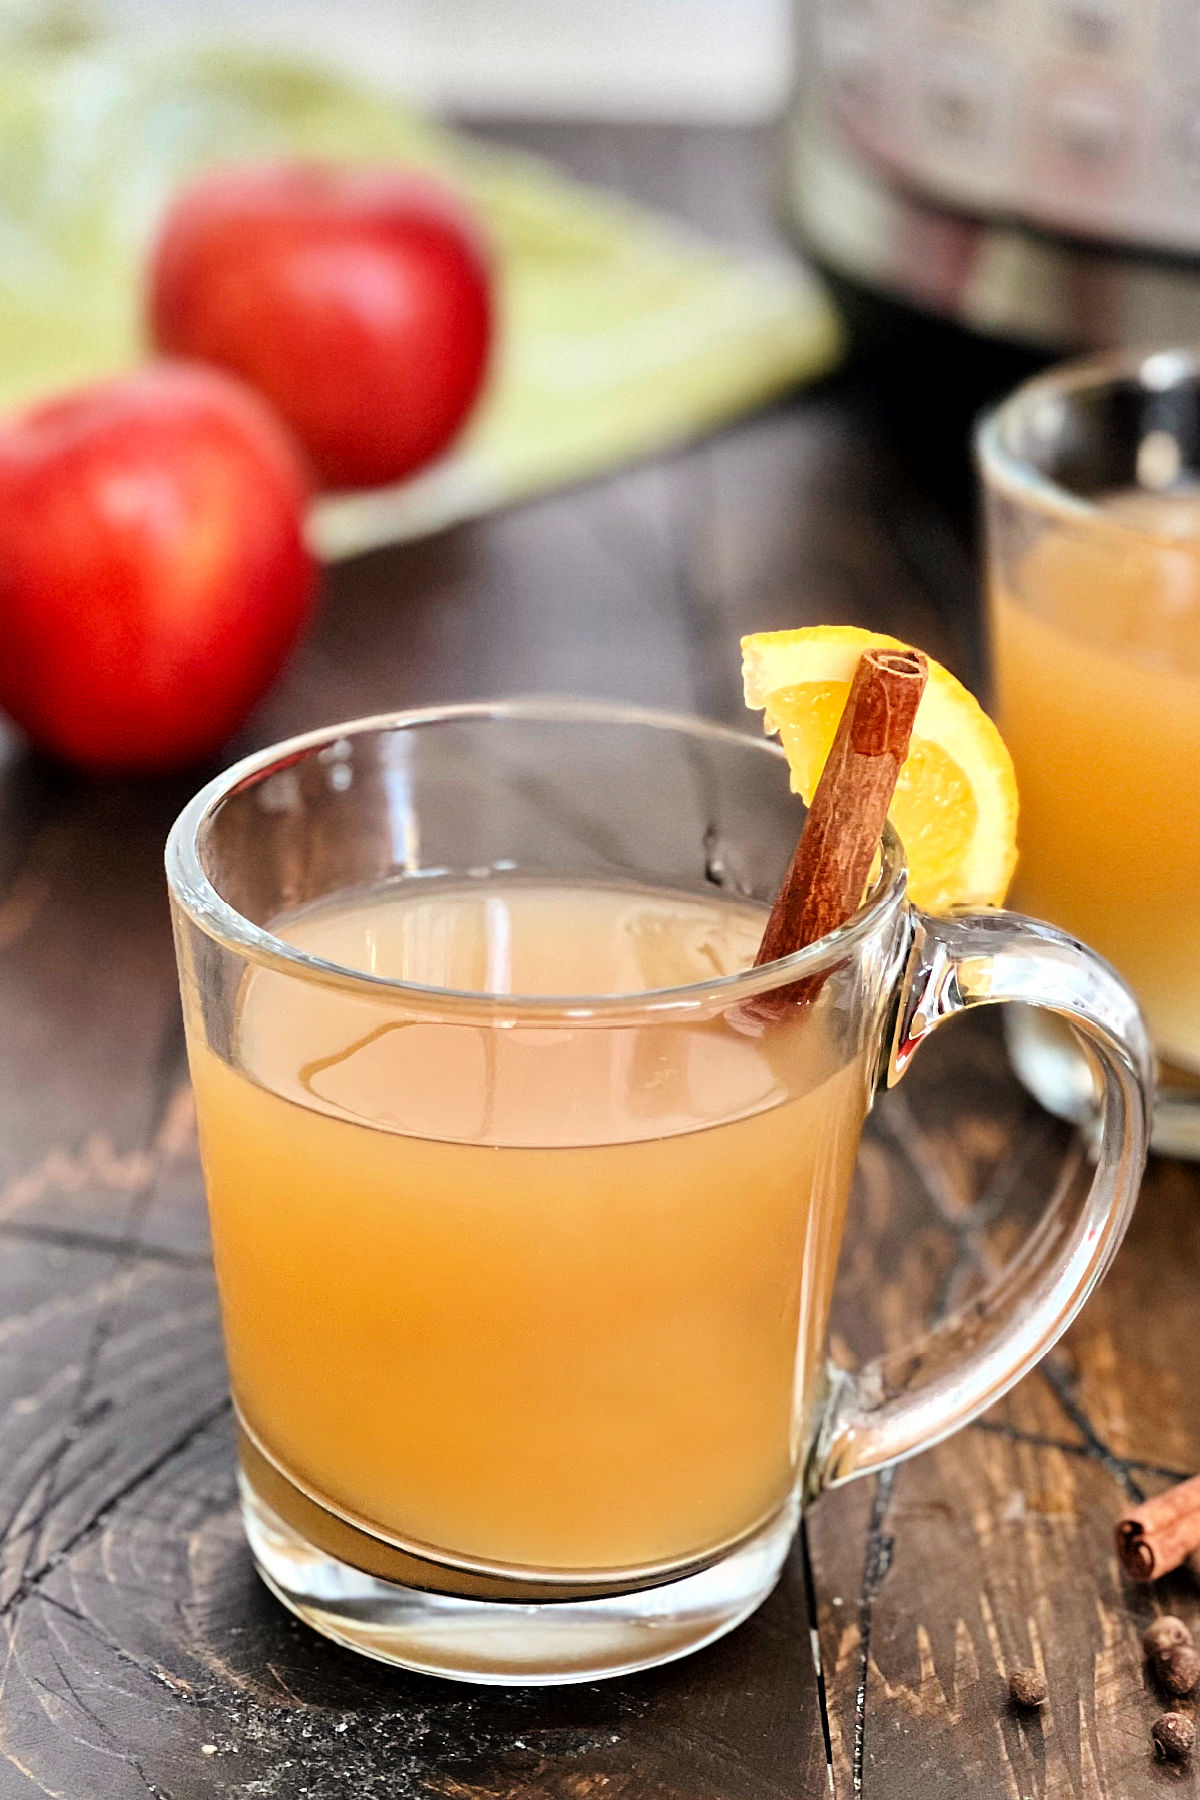 A glass of crock pot mulled cider with a cinnamon stick.